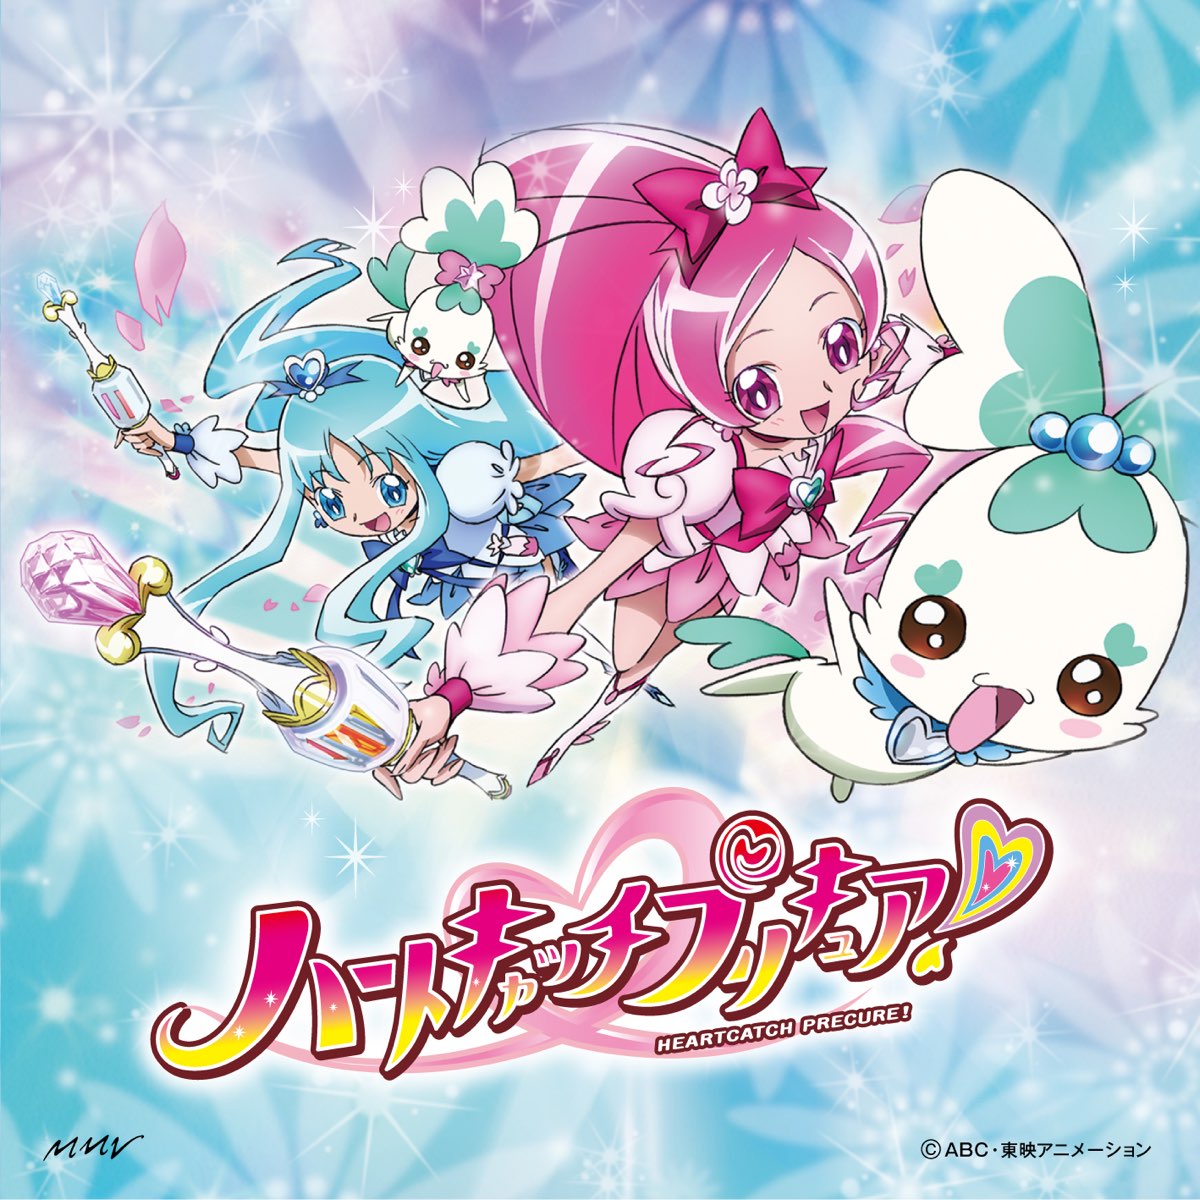 Alright ハートキャッチプリキュア ハートキャッチ パラダイス ハートキャッチプリキュア Ep Di Various Artists Su Itunes